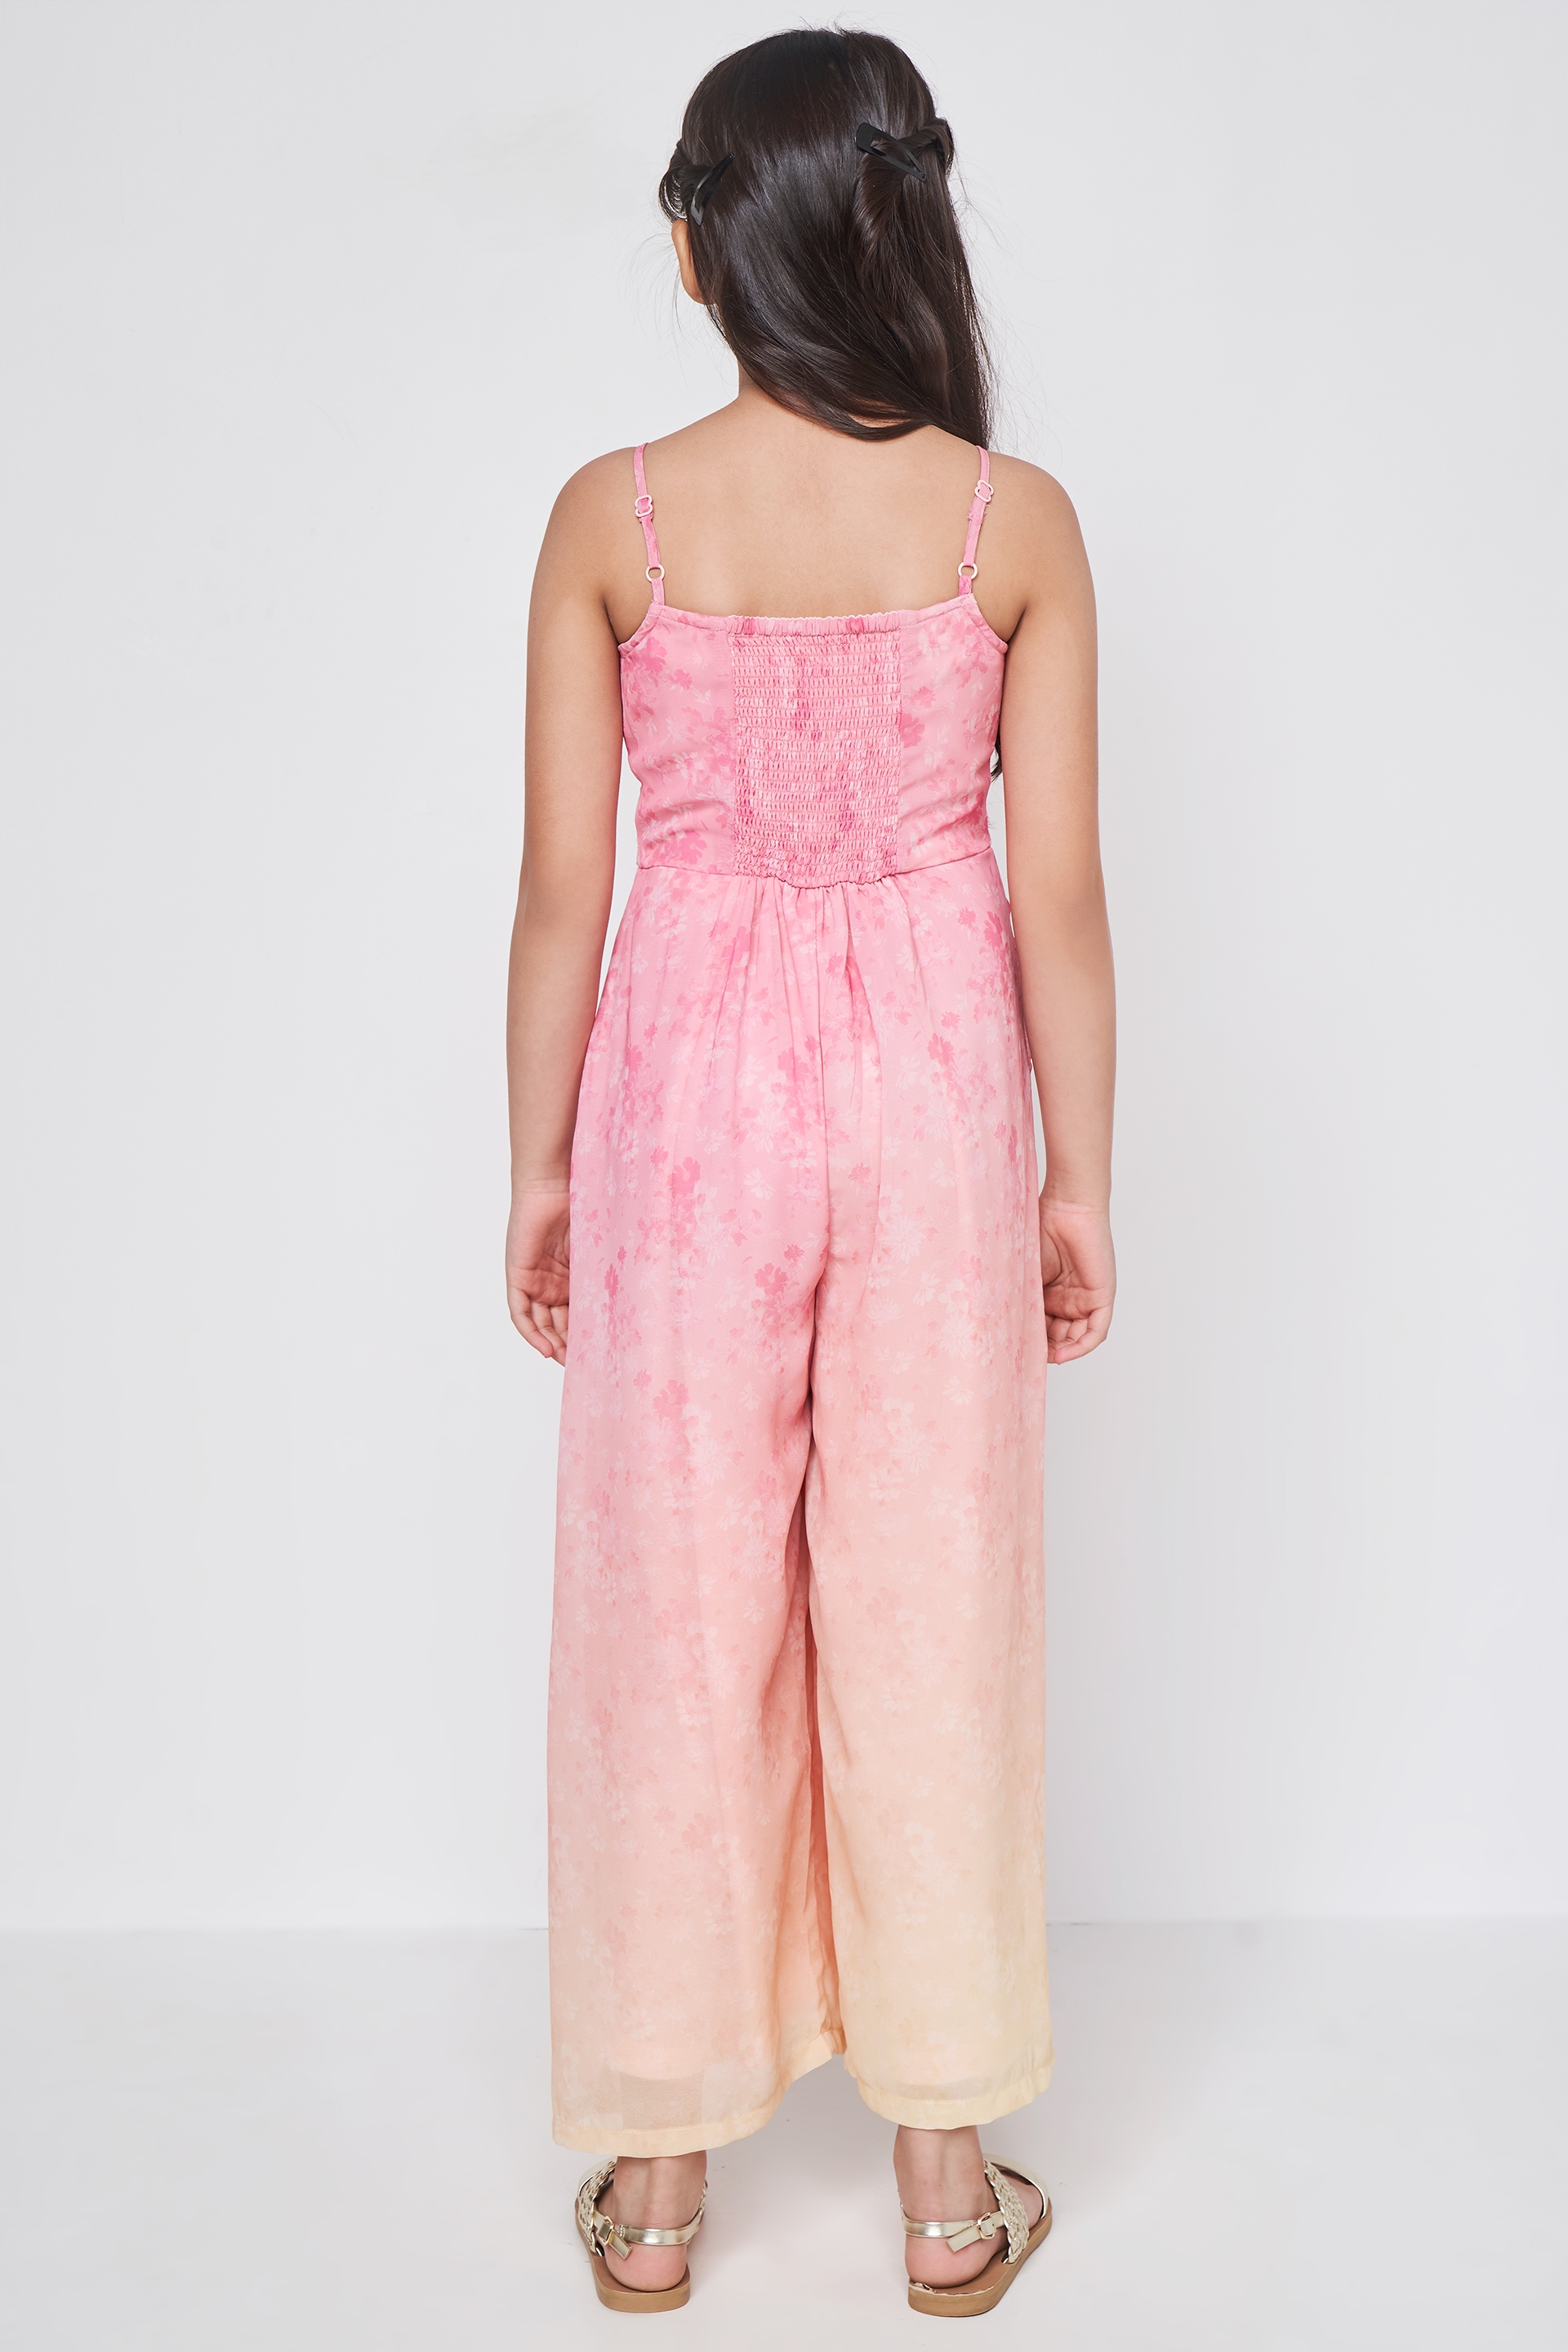 AND Girl Straight Pink Jump Suit